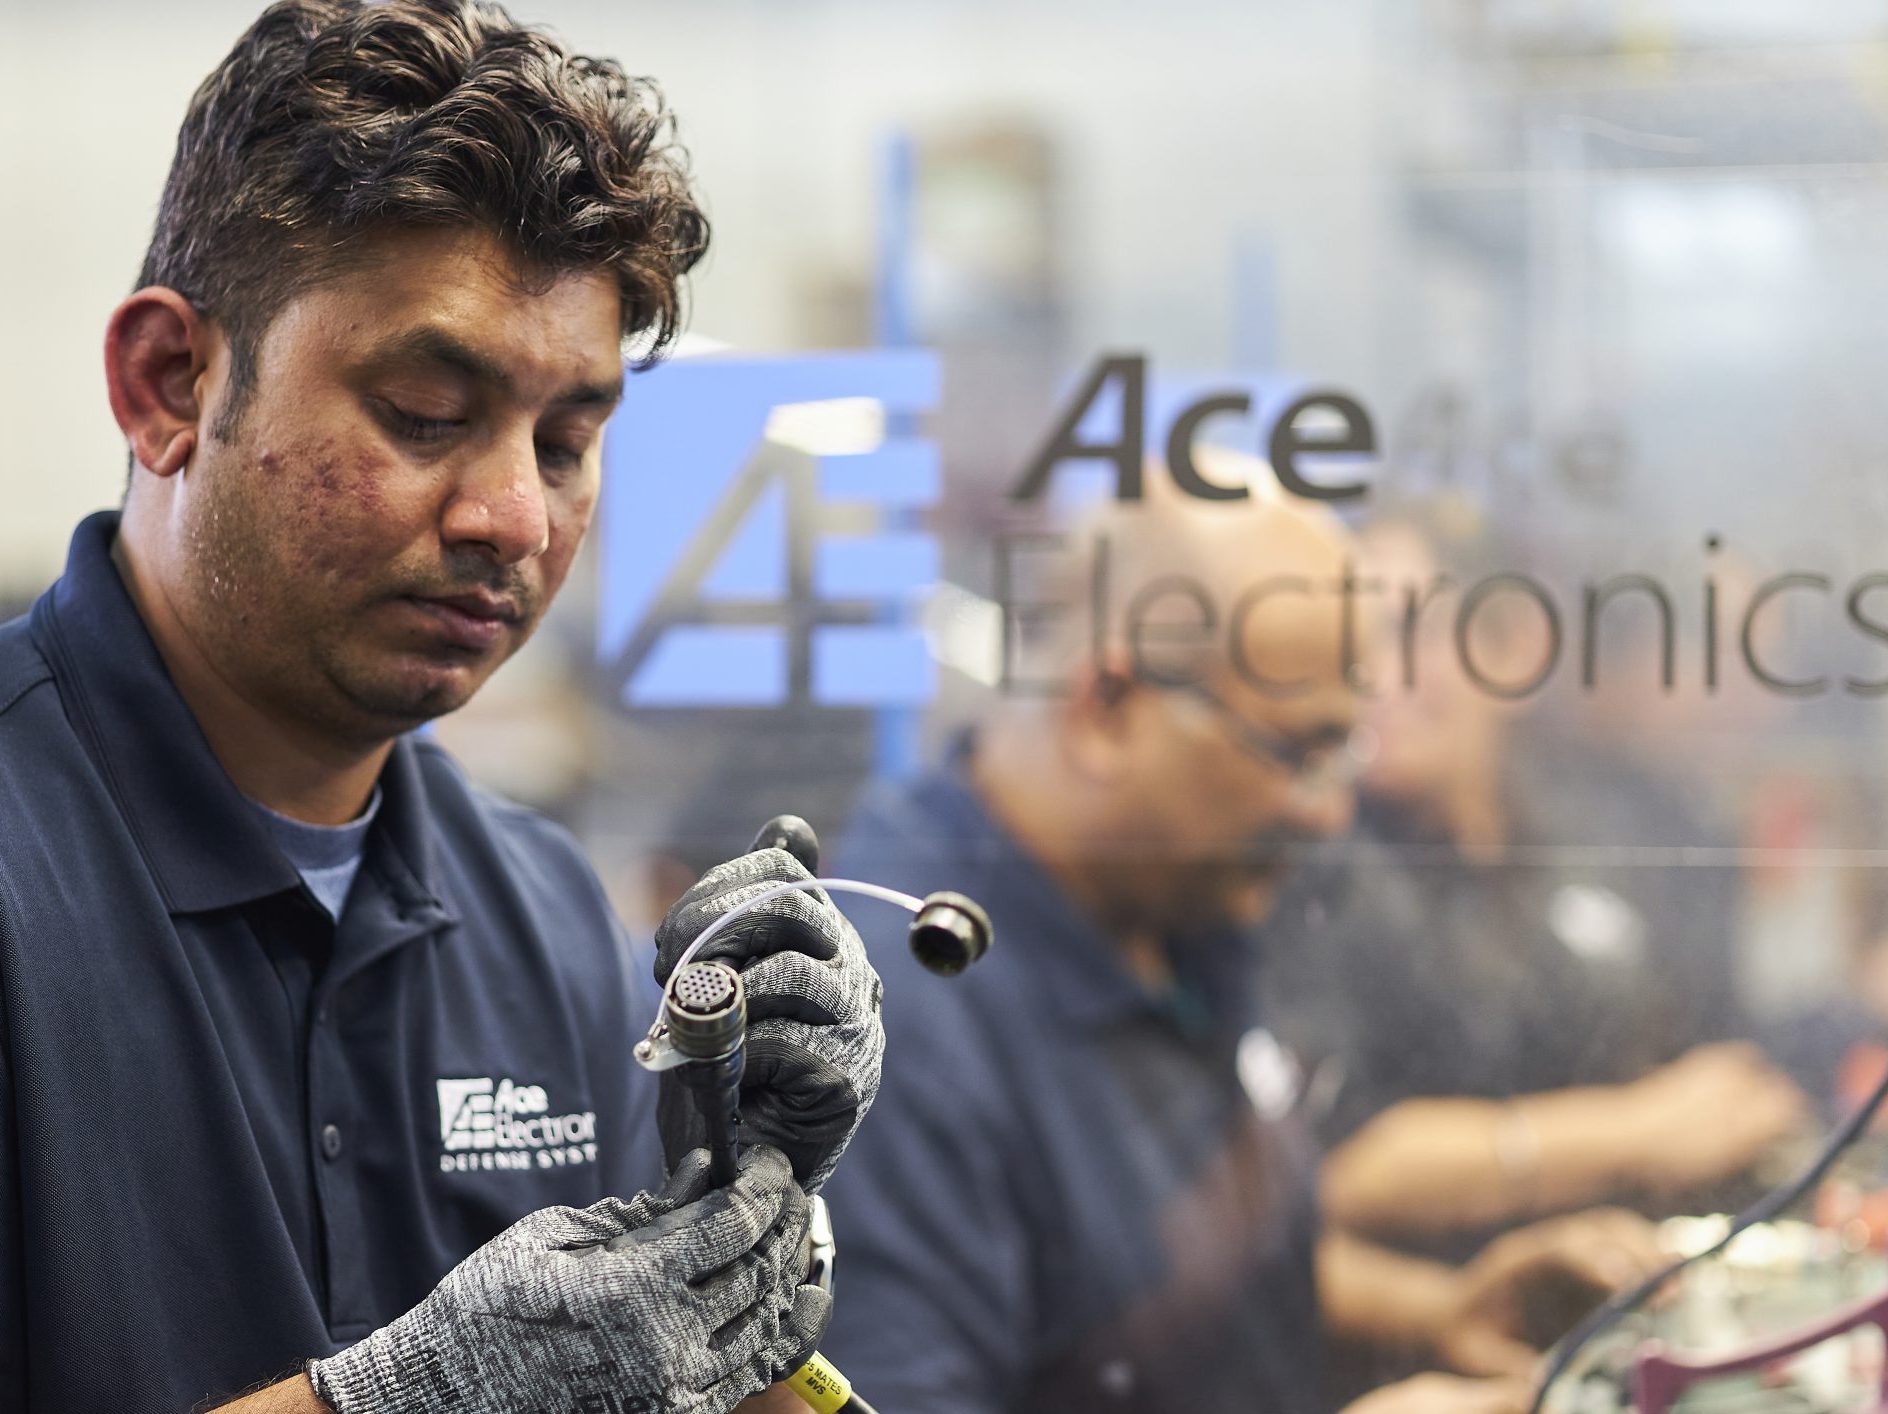 contract manufacturing ace electronics 4